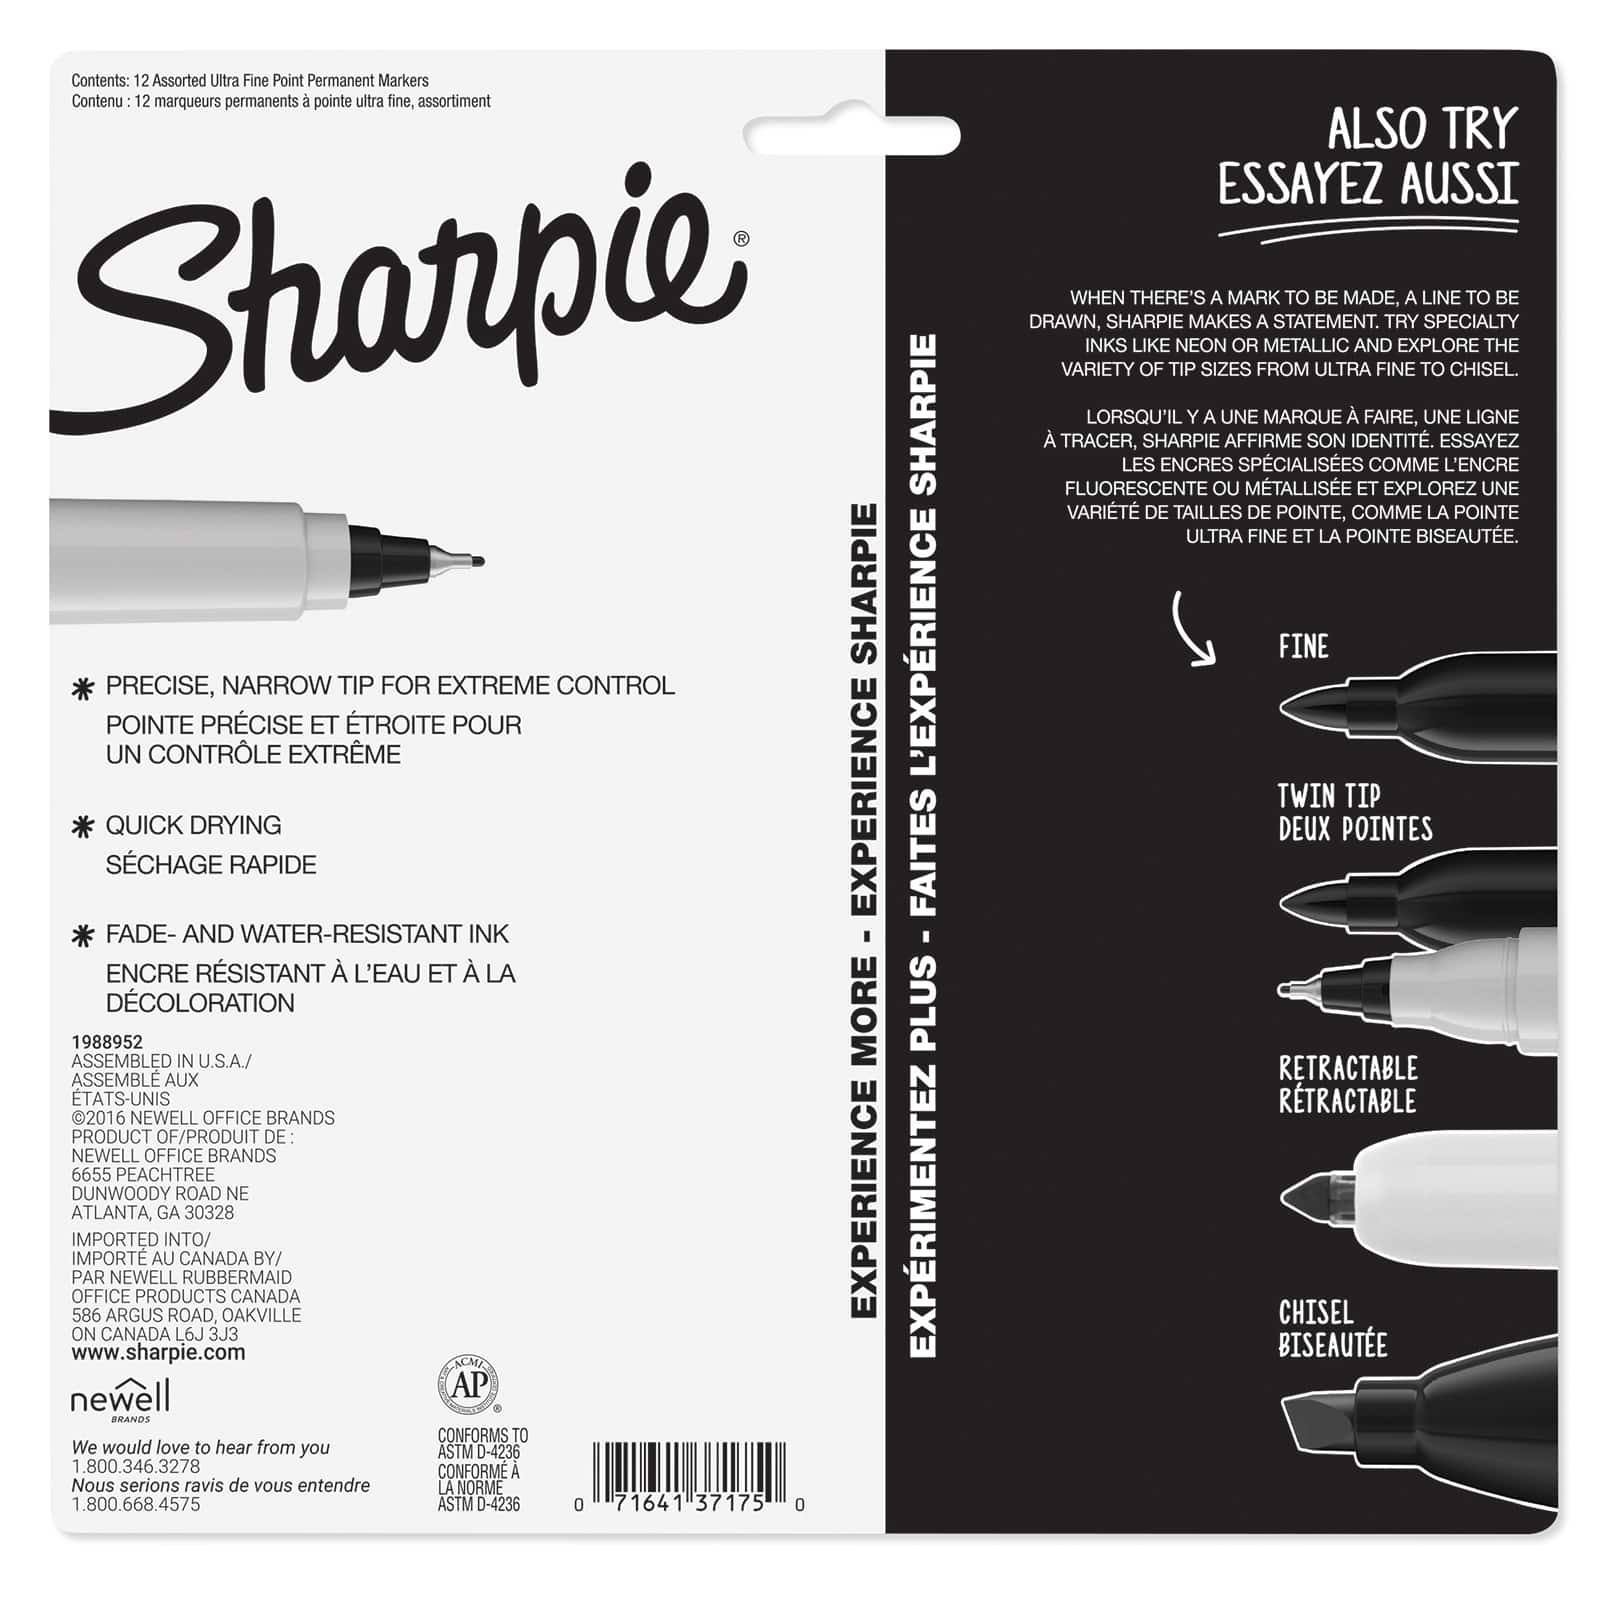 12 Packs: 12 ct. (144 total) Sharpie&#xAE; Ultra Fine Point Permanent Markers